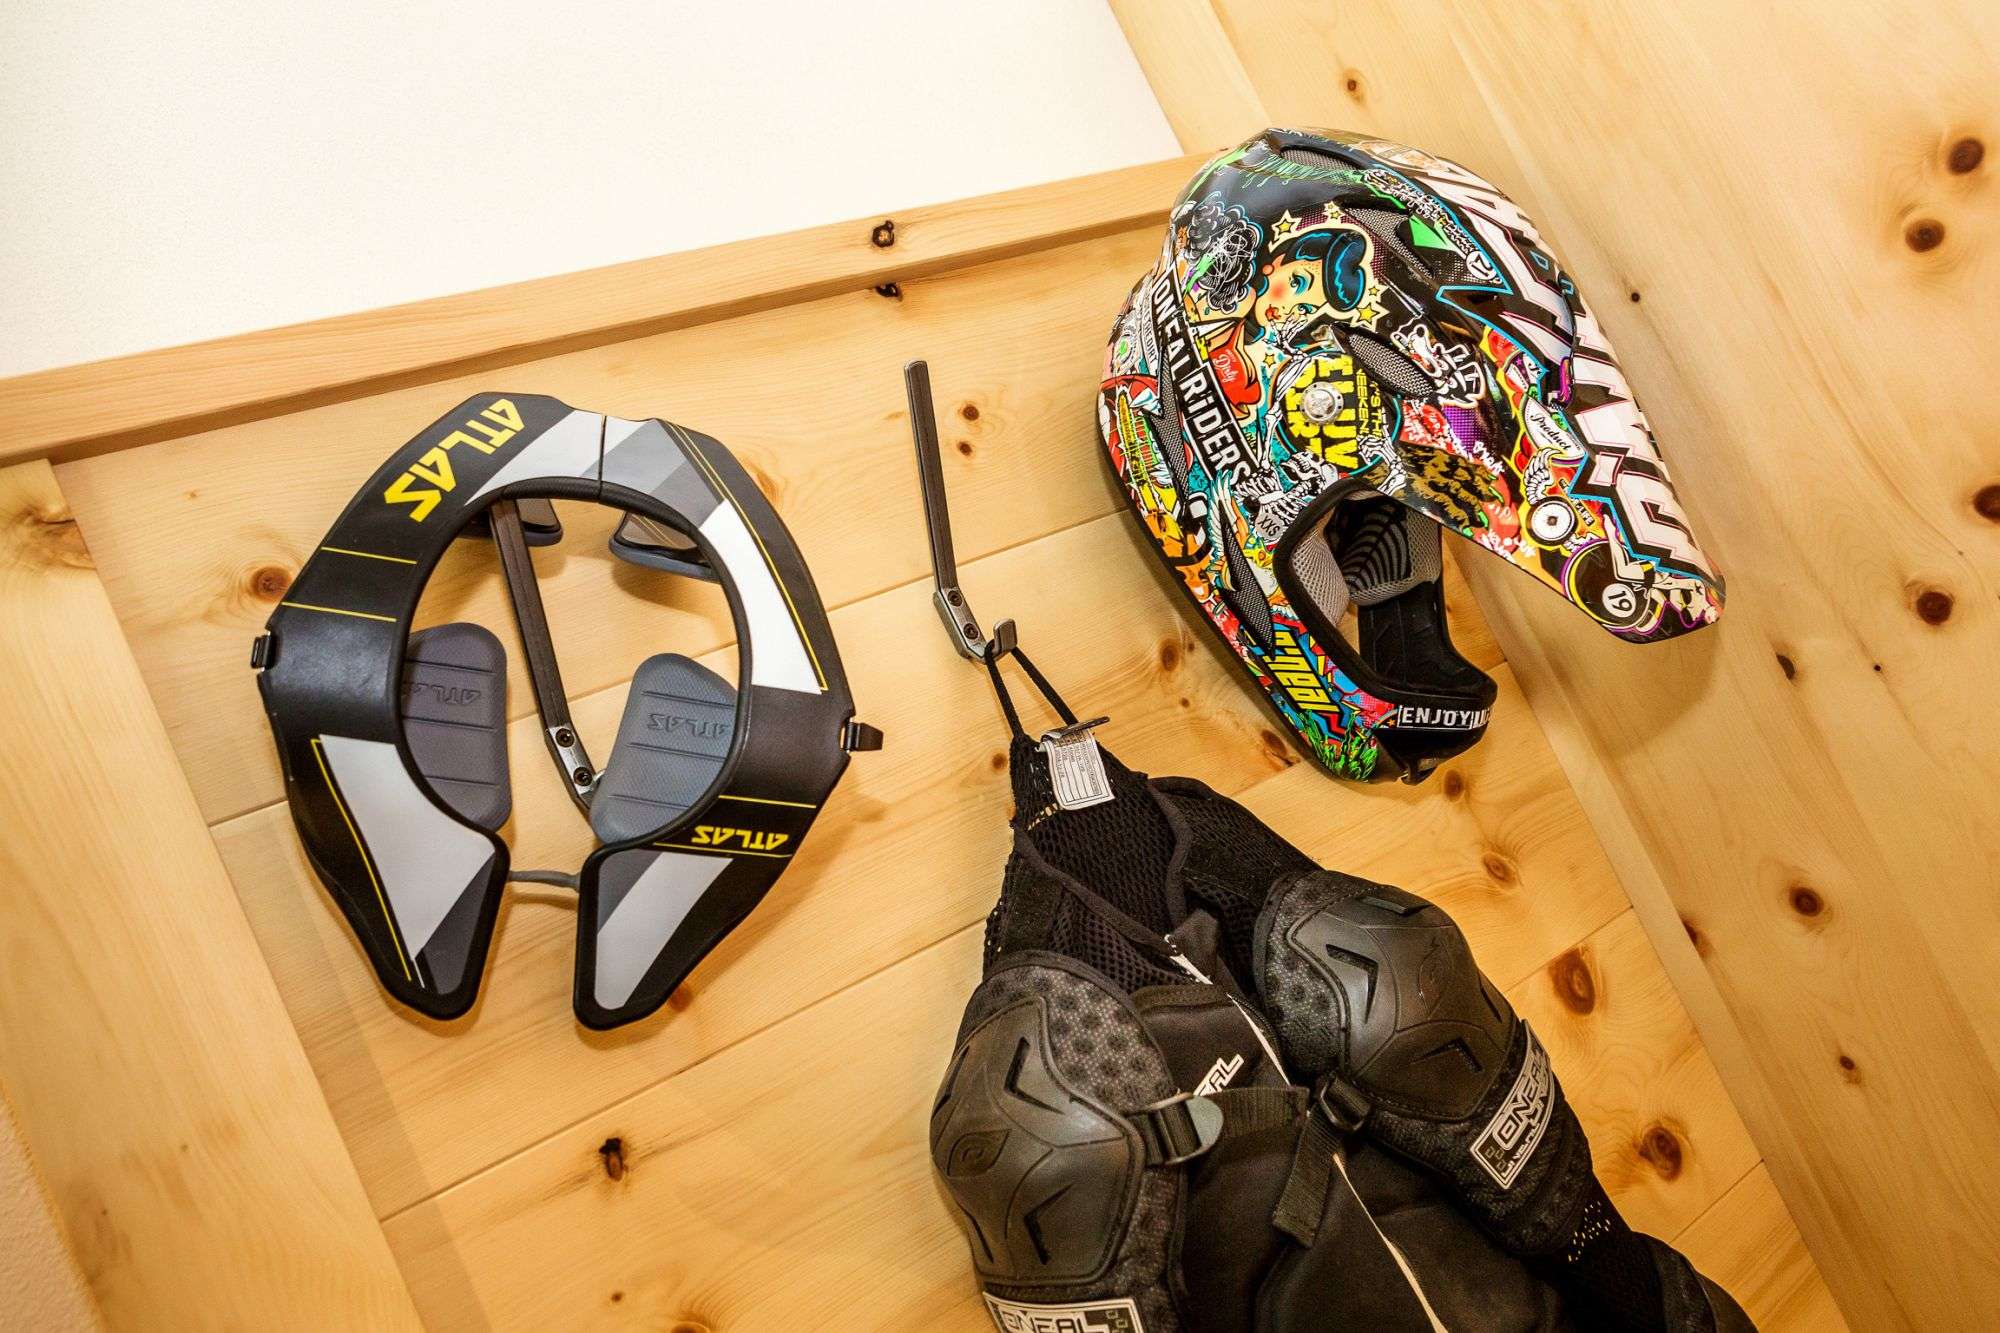 A motorbike helmet, a motorbike jacket and a motorbike protector hang on the chest of drawers